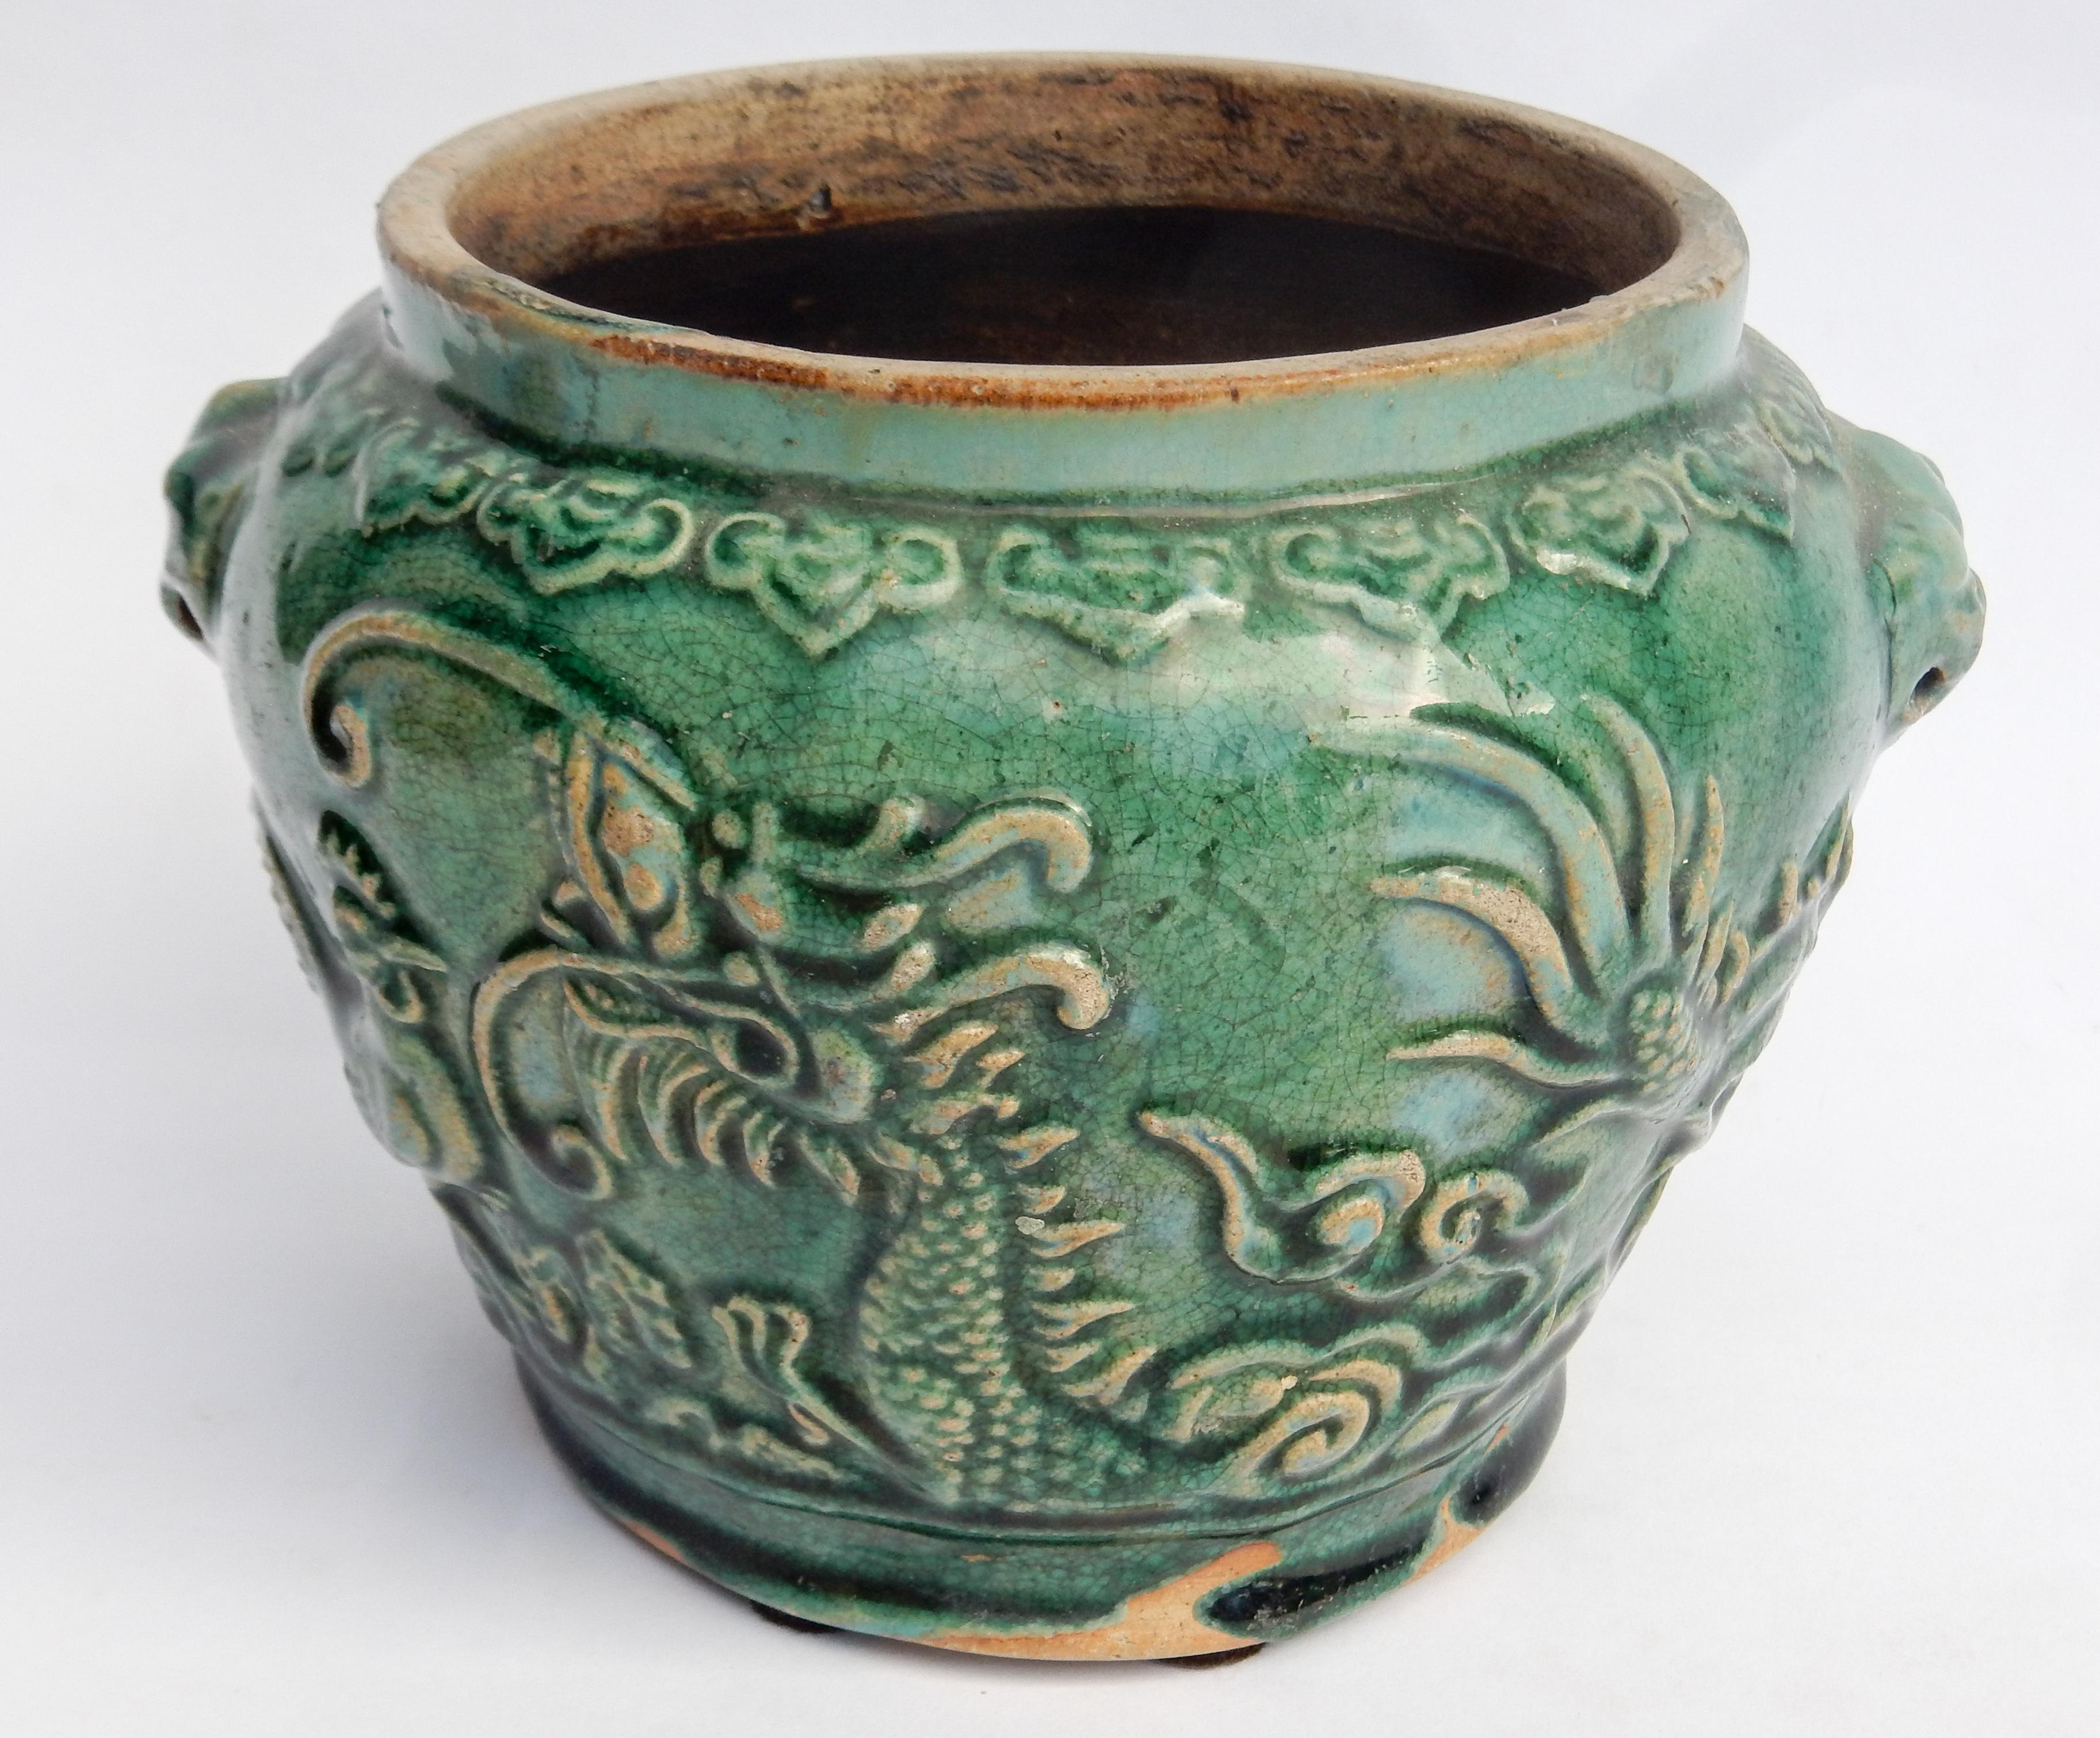 Other Old Green Glazed Pot from Southern Thailand, Found in Java, Late 19th Century